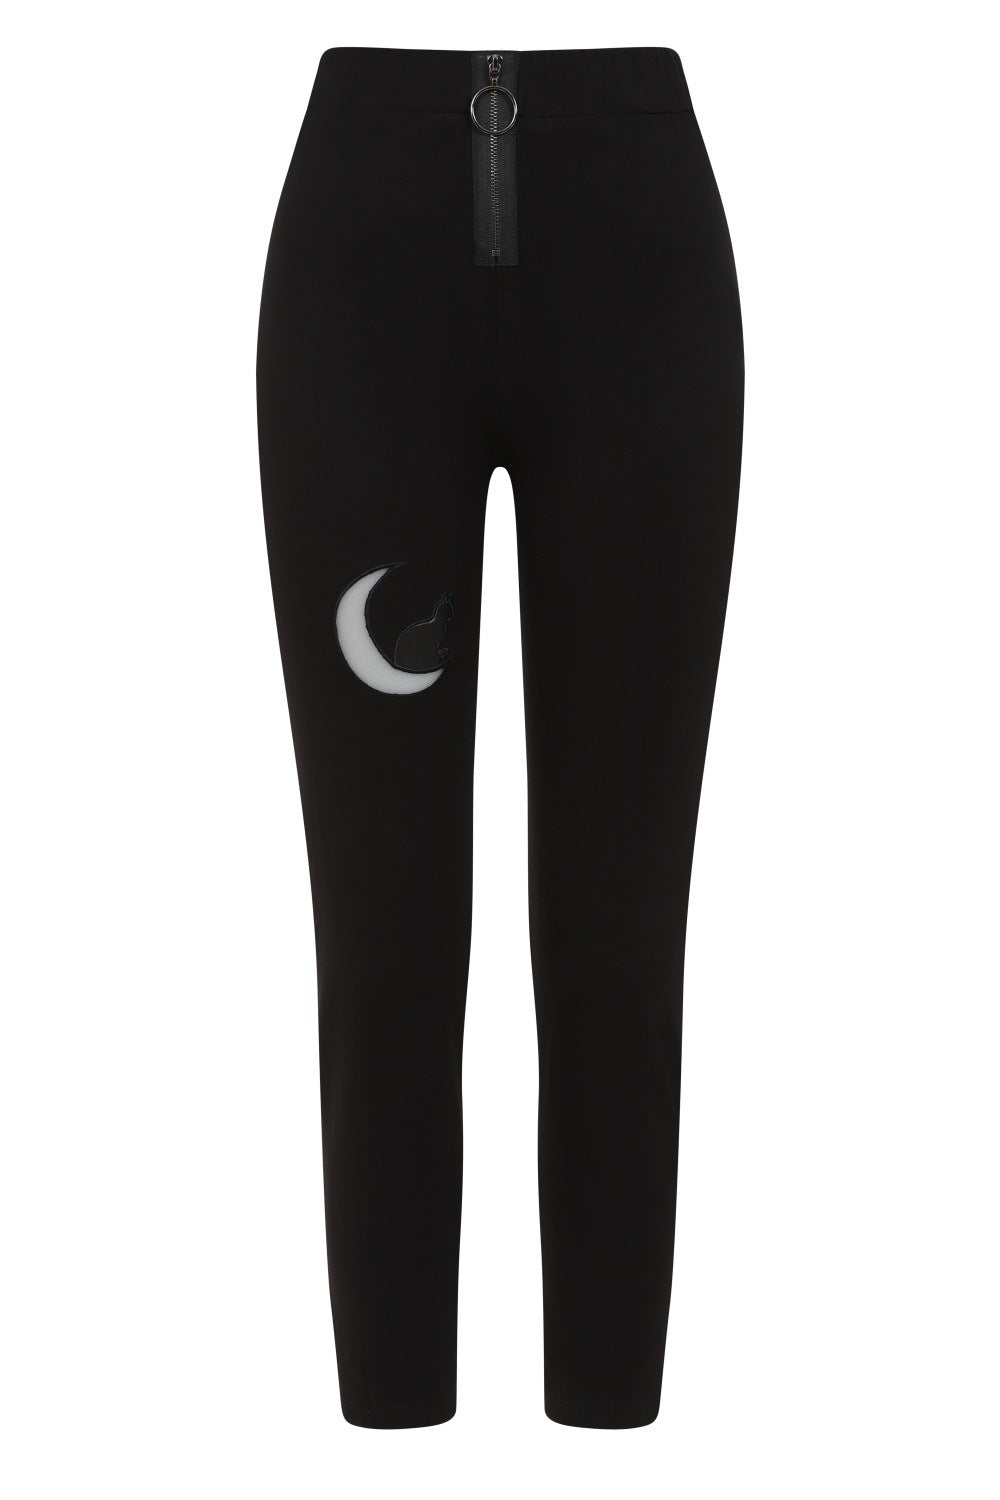 MOON CHILD LEGGINGS black gothic pants with panels - Restyle